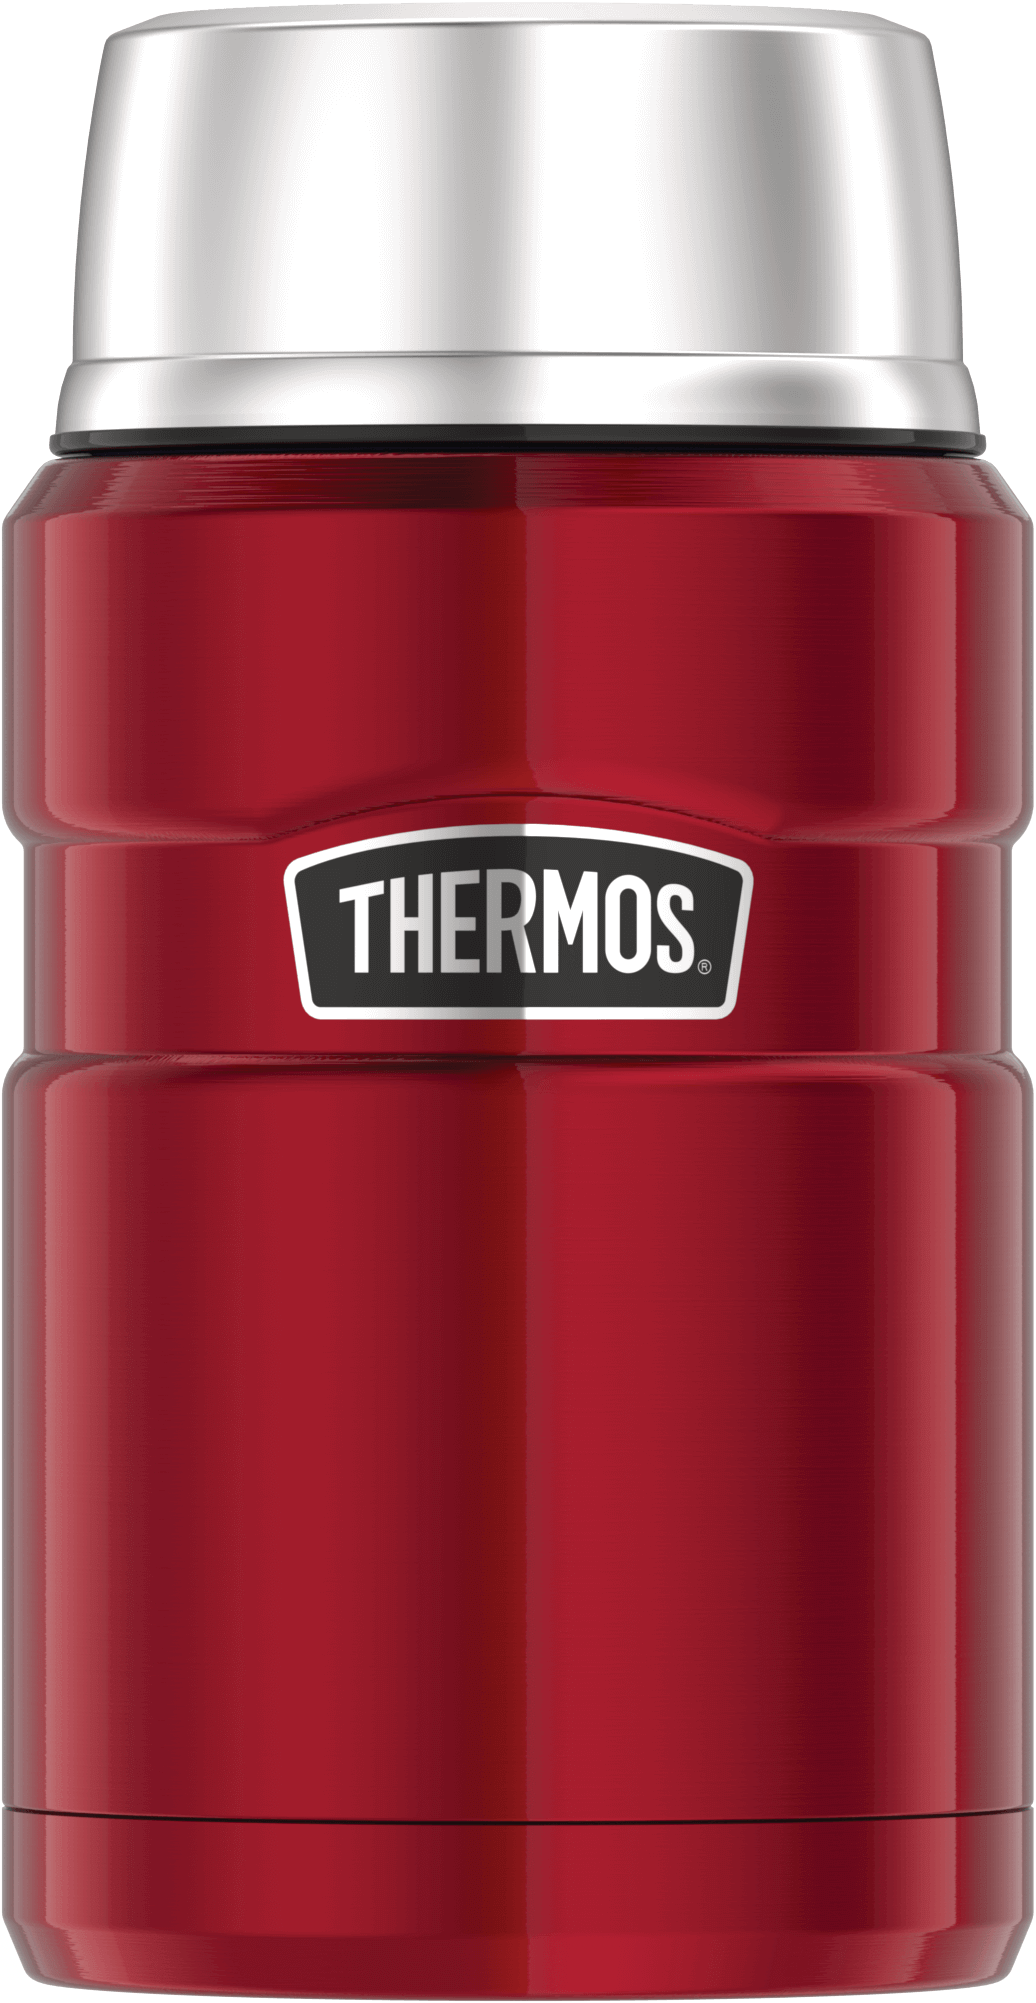 Thermos 8oz Double Insulated Soup Cup w/ Folding Spoon Blue/Red